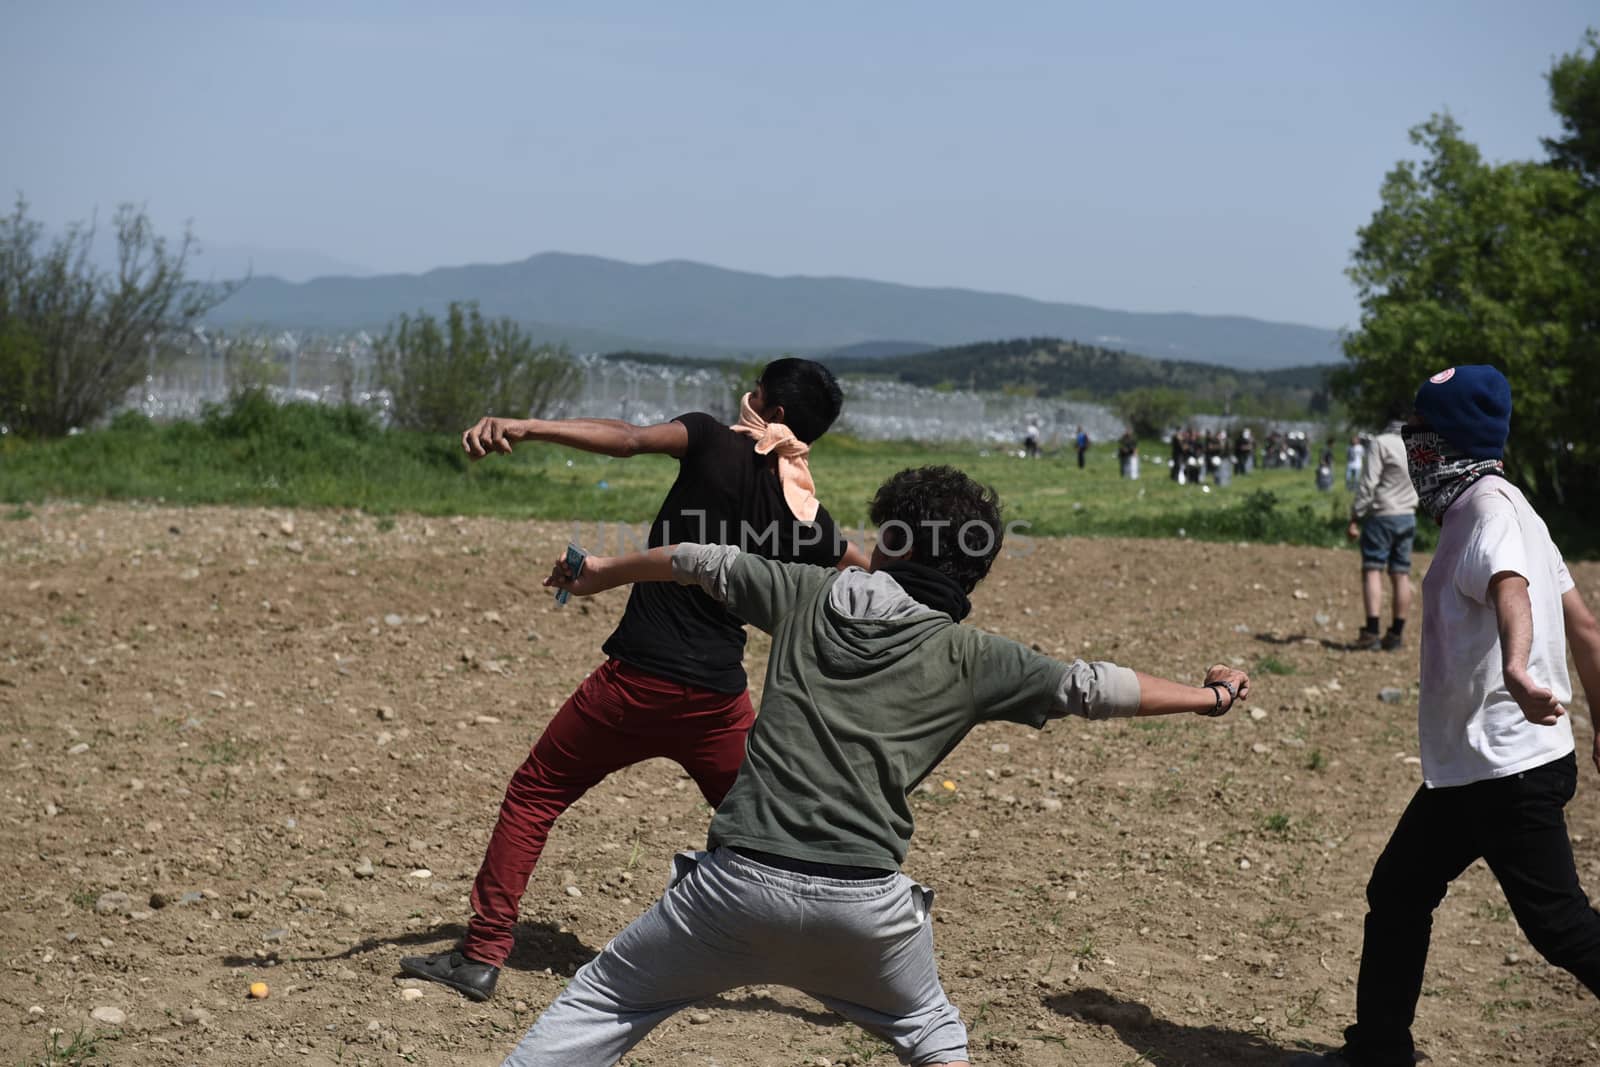 GREECE, Idomeni: Two men throw stones back to macedonian police that fired tear gas as migrants and refugees tried to break down the border fence near their makeshift camp at the Greek-Macedonian border near Idomeni village, on April 13, 2016. About 100 migrants spread out over about 100 metres (yards) tugging at the wire fence, but swiftly pulled back when two squads of Greek riot police moved in, the reporter said. The Greek riot police positioned themselves between the migrants and the Macedonian fence, ending the incident.